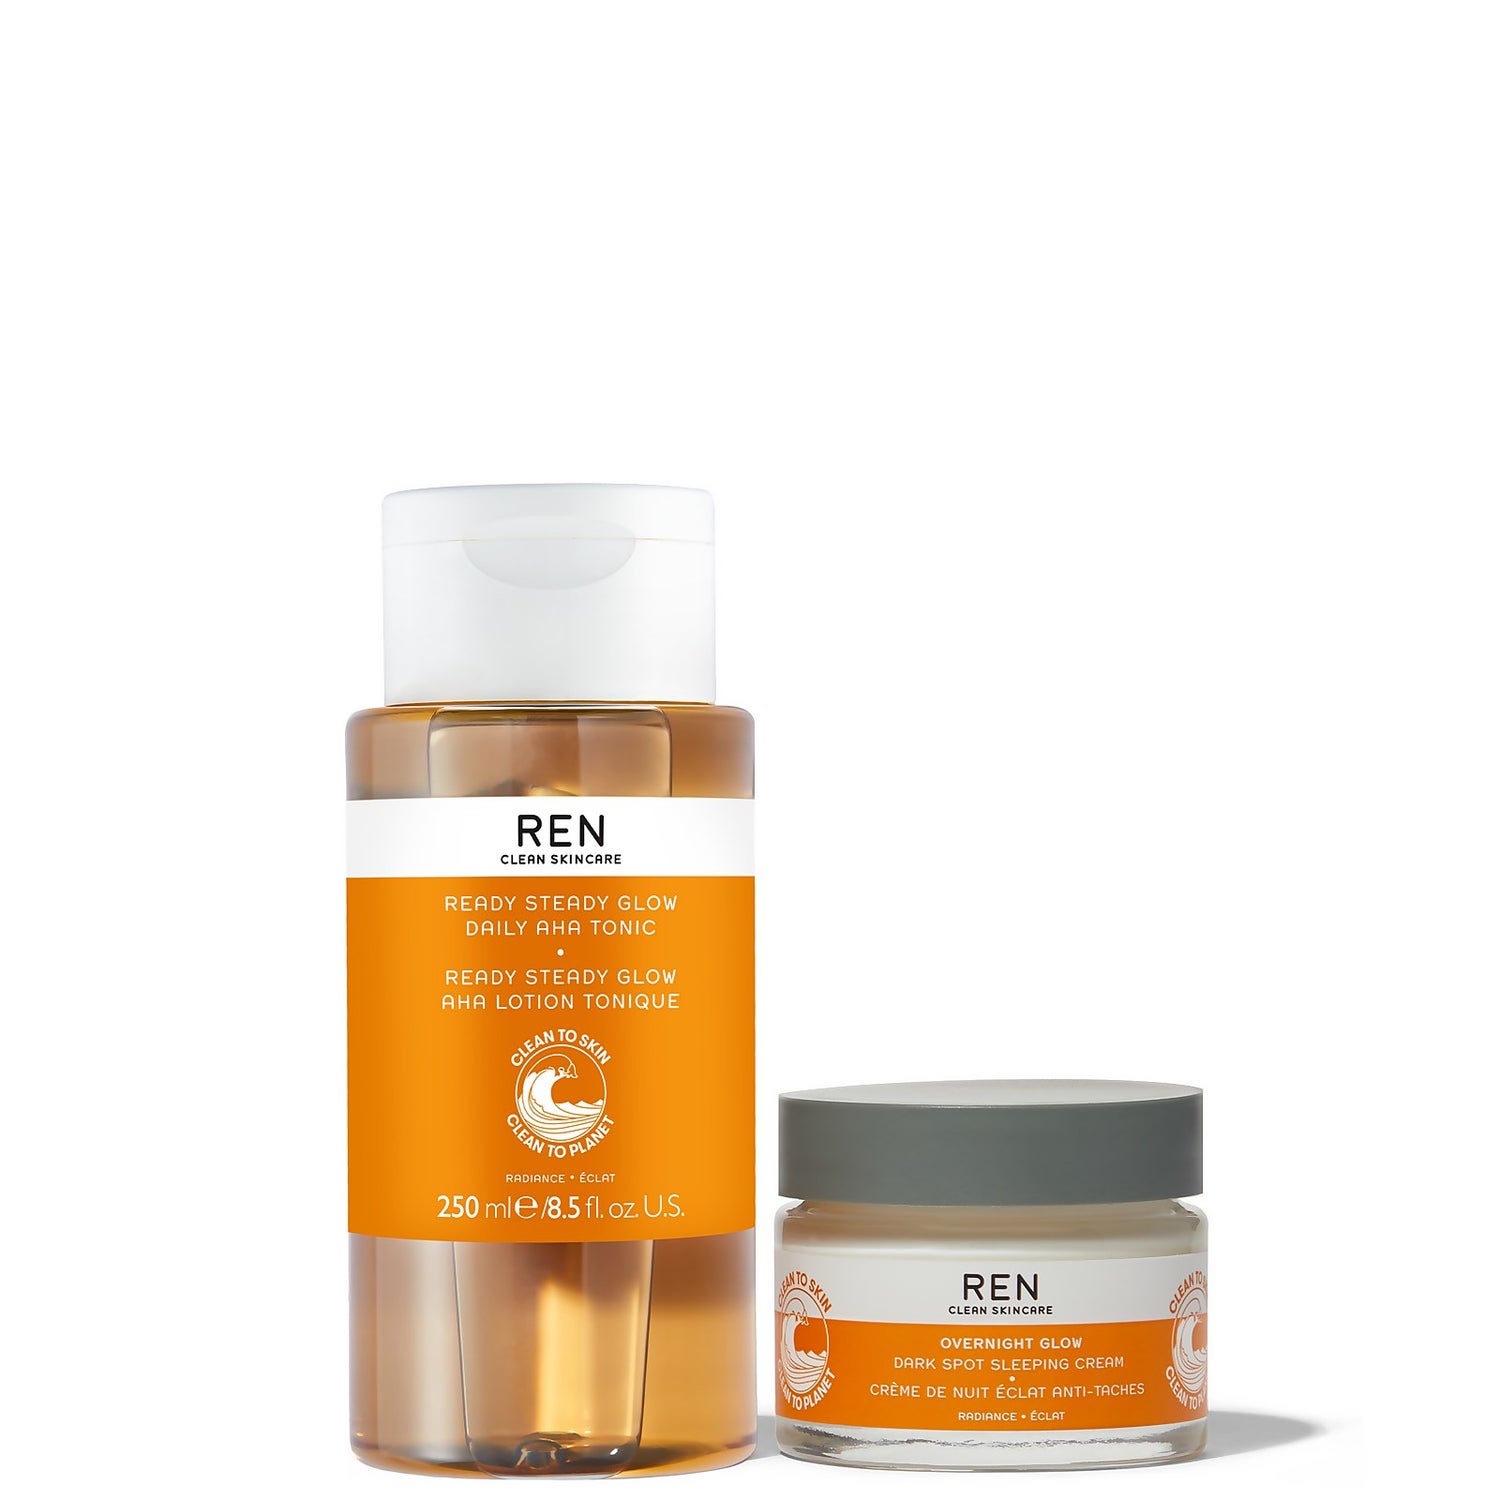 REN Clean Skincare Ready Steady Glow and Overnight Glow Set (Worth £84.00)